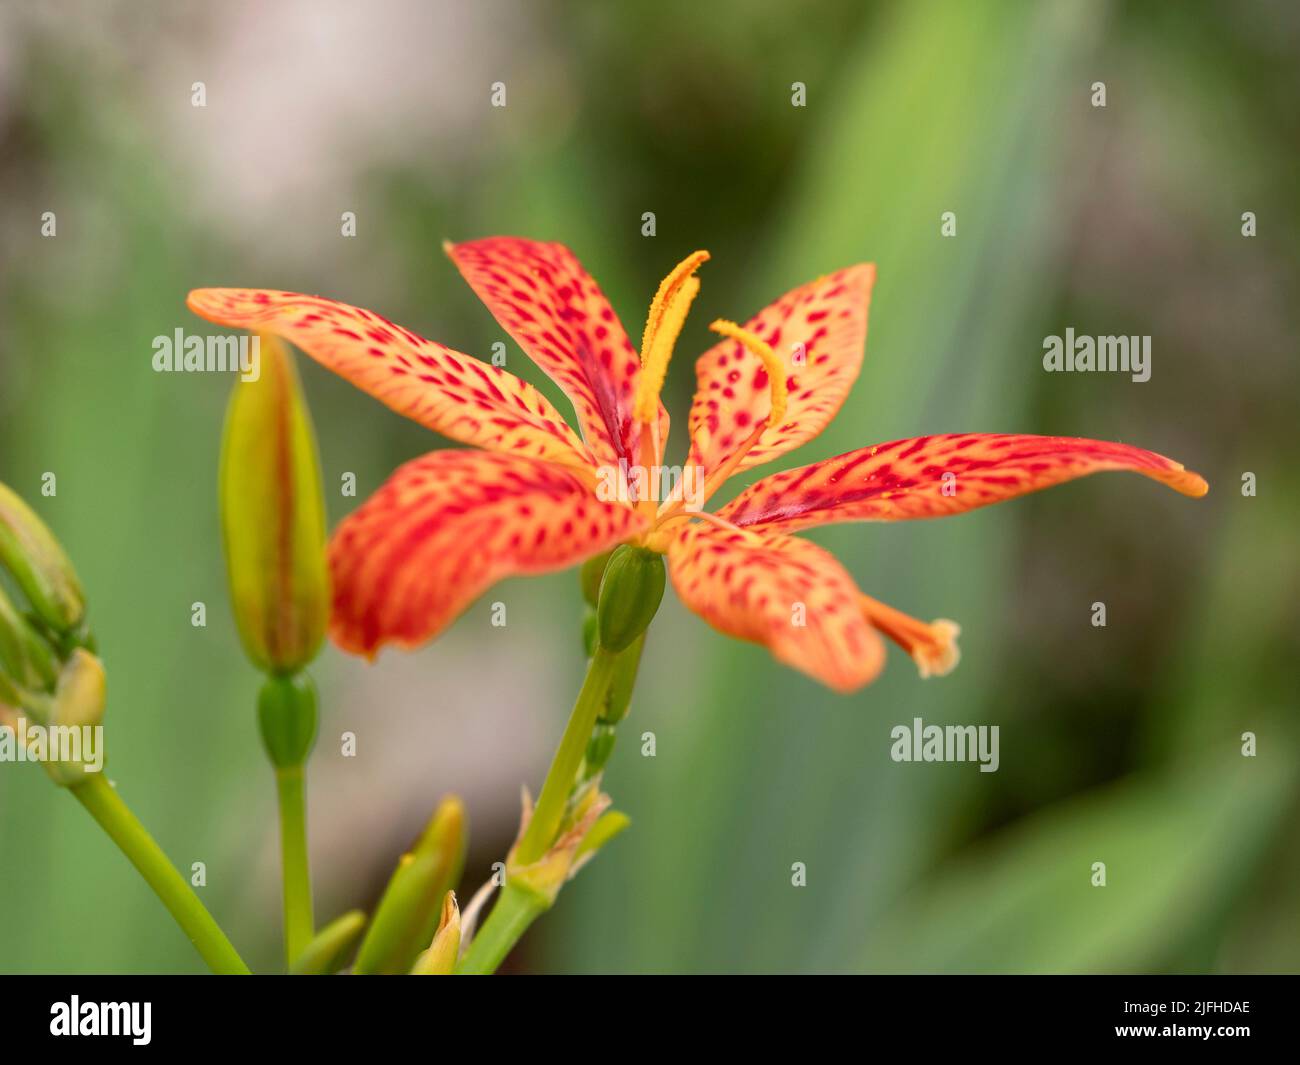 Closeup of a lovely orange blackberry lily flower Stock Photo